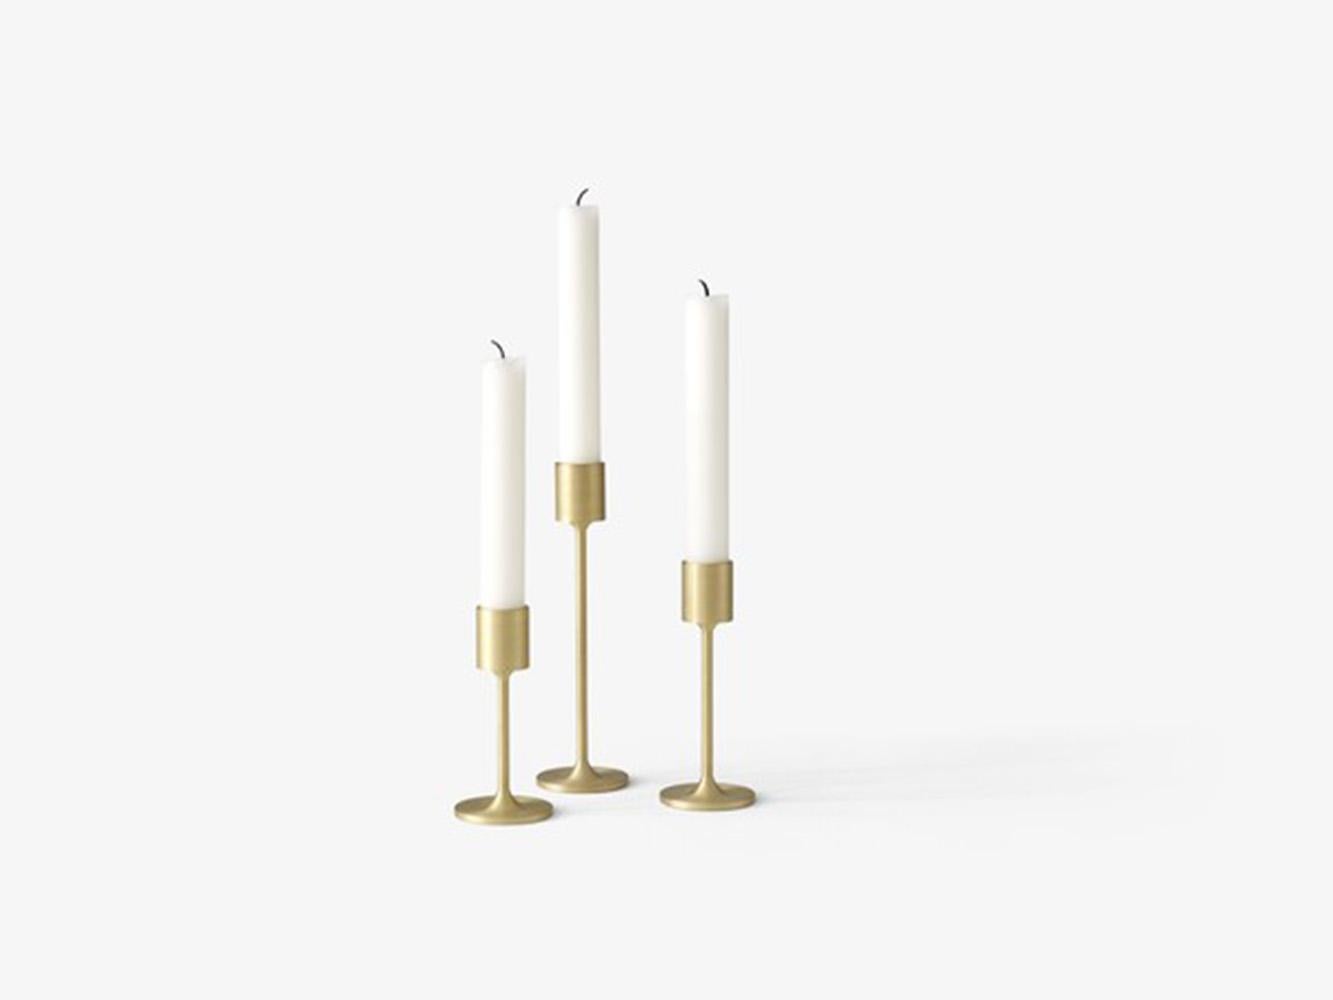 Inspired by the striking simplicity of Doric columns found in Ancient Greece, this gleaming brushed brass candleholder is a sculptural addition to the home. 
It is the smallest size of the collect cardholders, designed by Space Copenhagen.